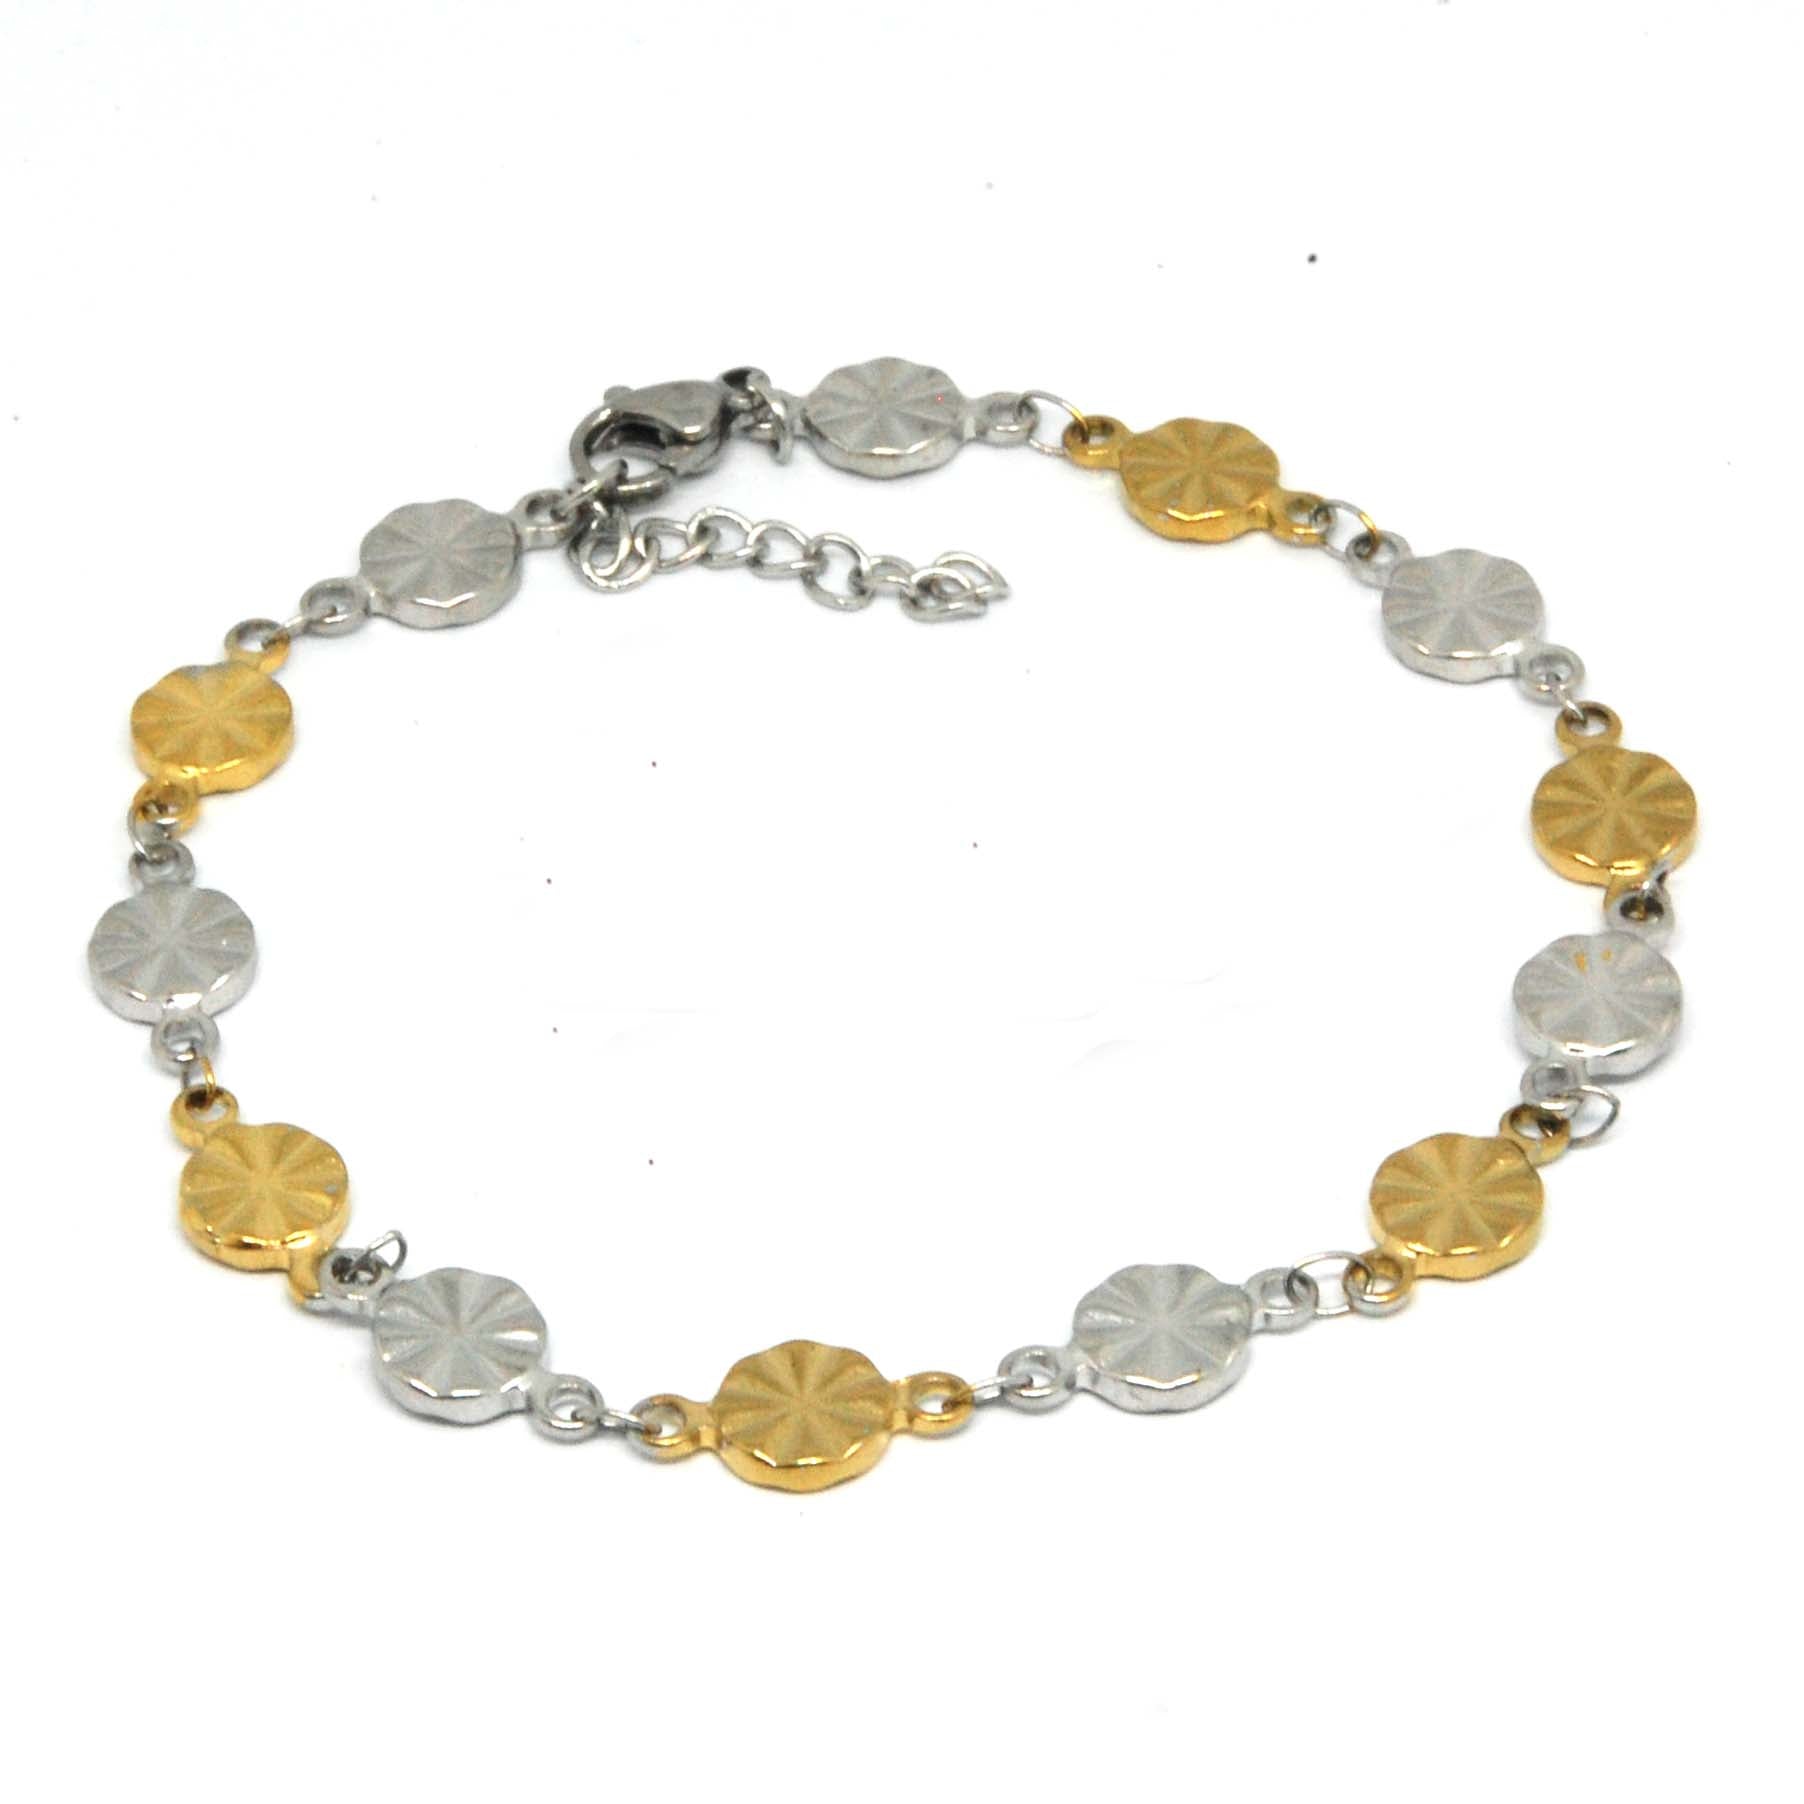 ESA 6296: 2-Tone Wheel of Fortune Anklet